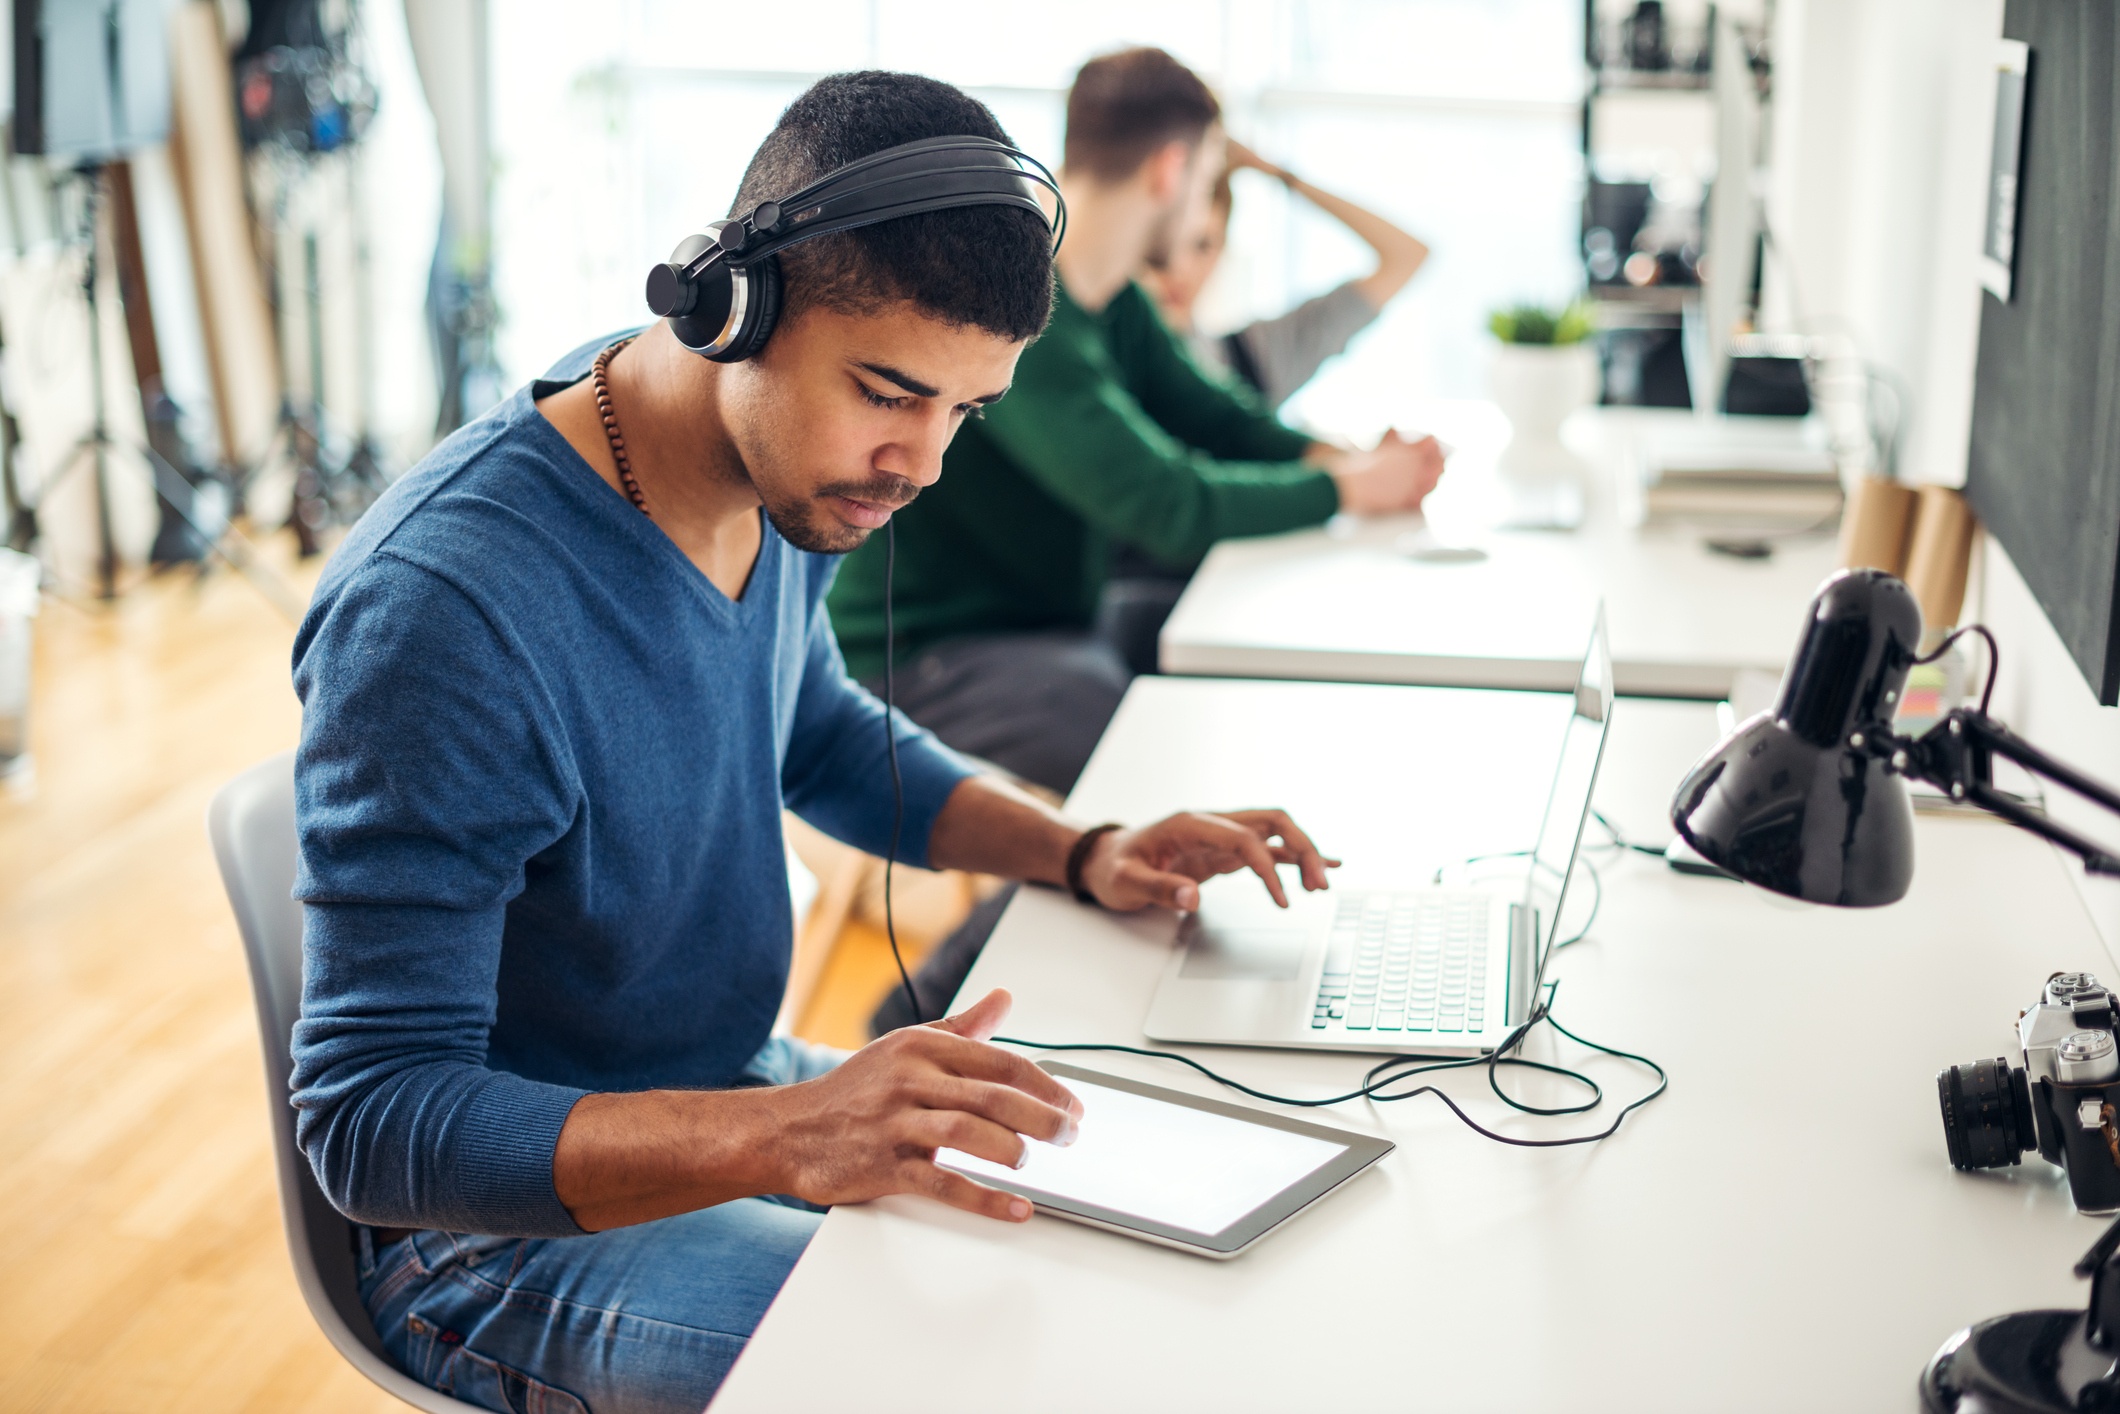 Allow employees to listen to music in the workplace